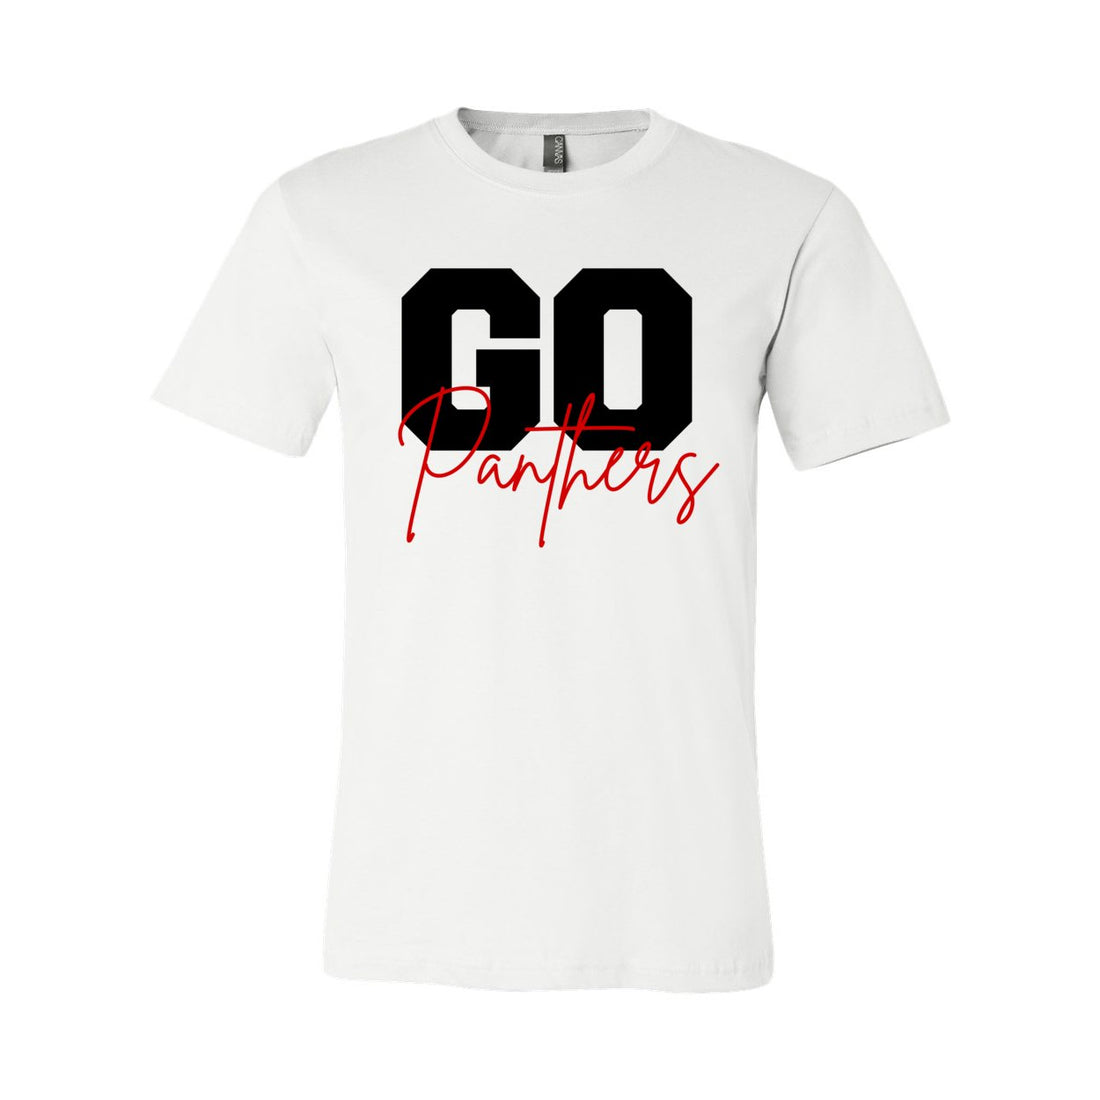 Go Panthers T-Shirt - T-Shirts - Positively Sassy - Go Panthers T-Shirt